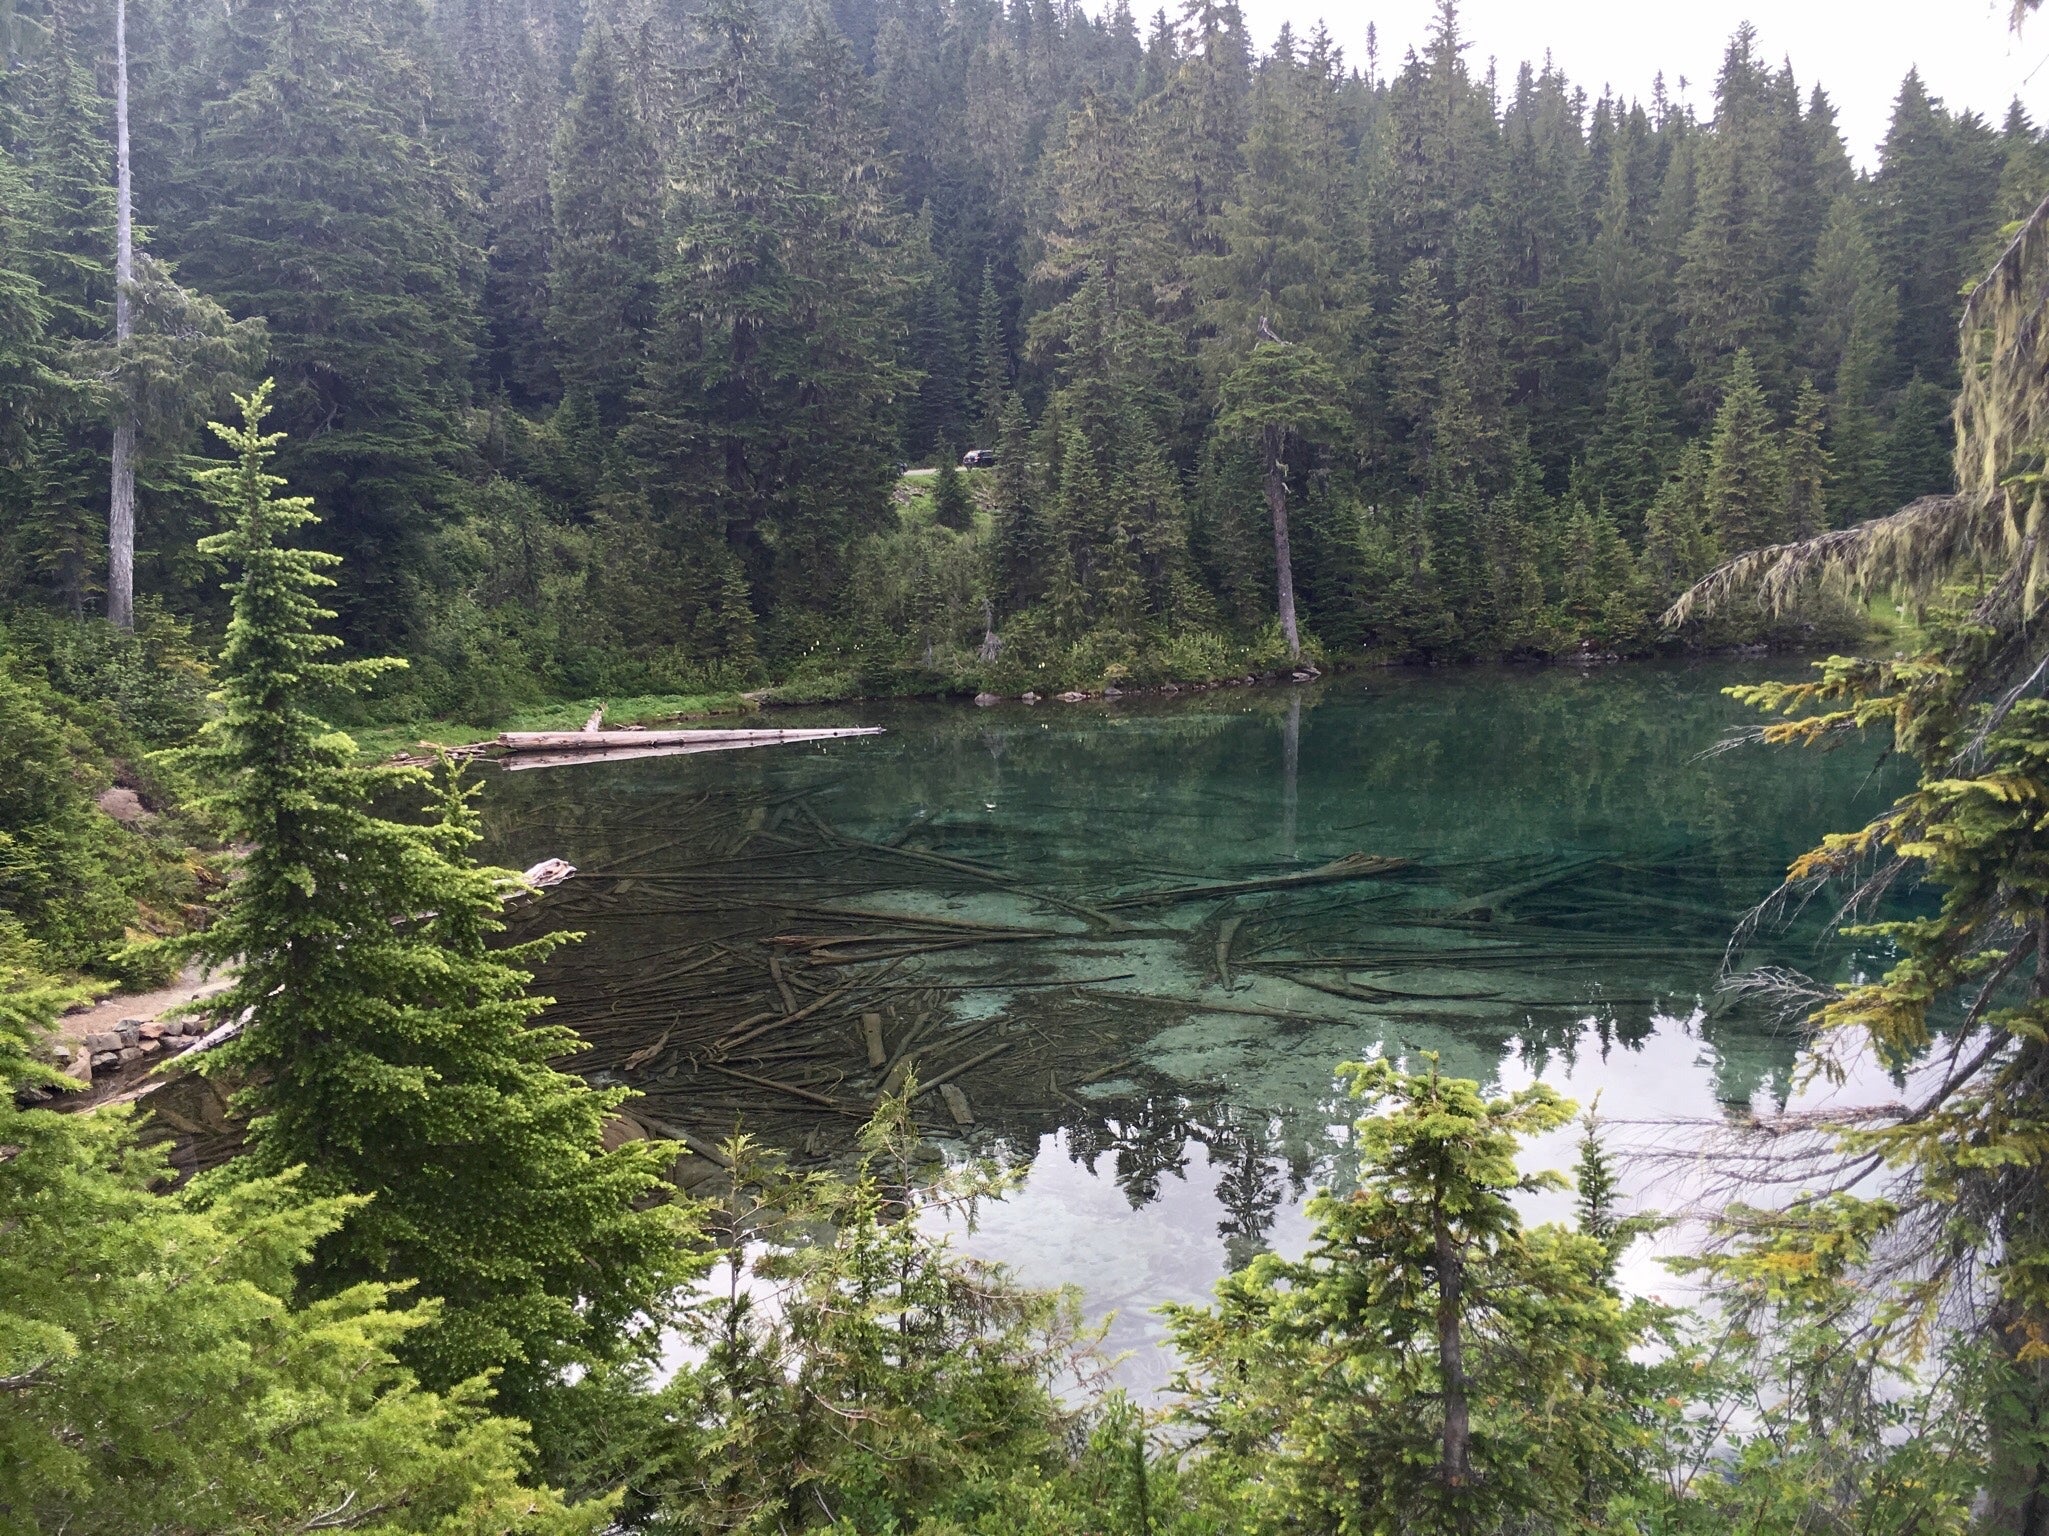 Camper submitted image from Granite Lake Dispersed Camping Area - 3